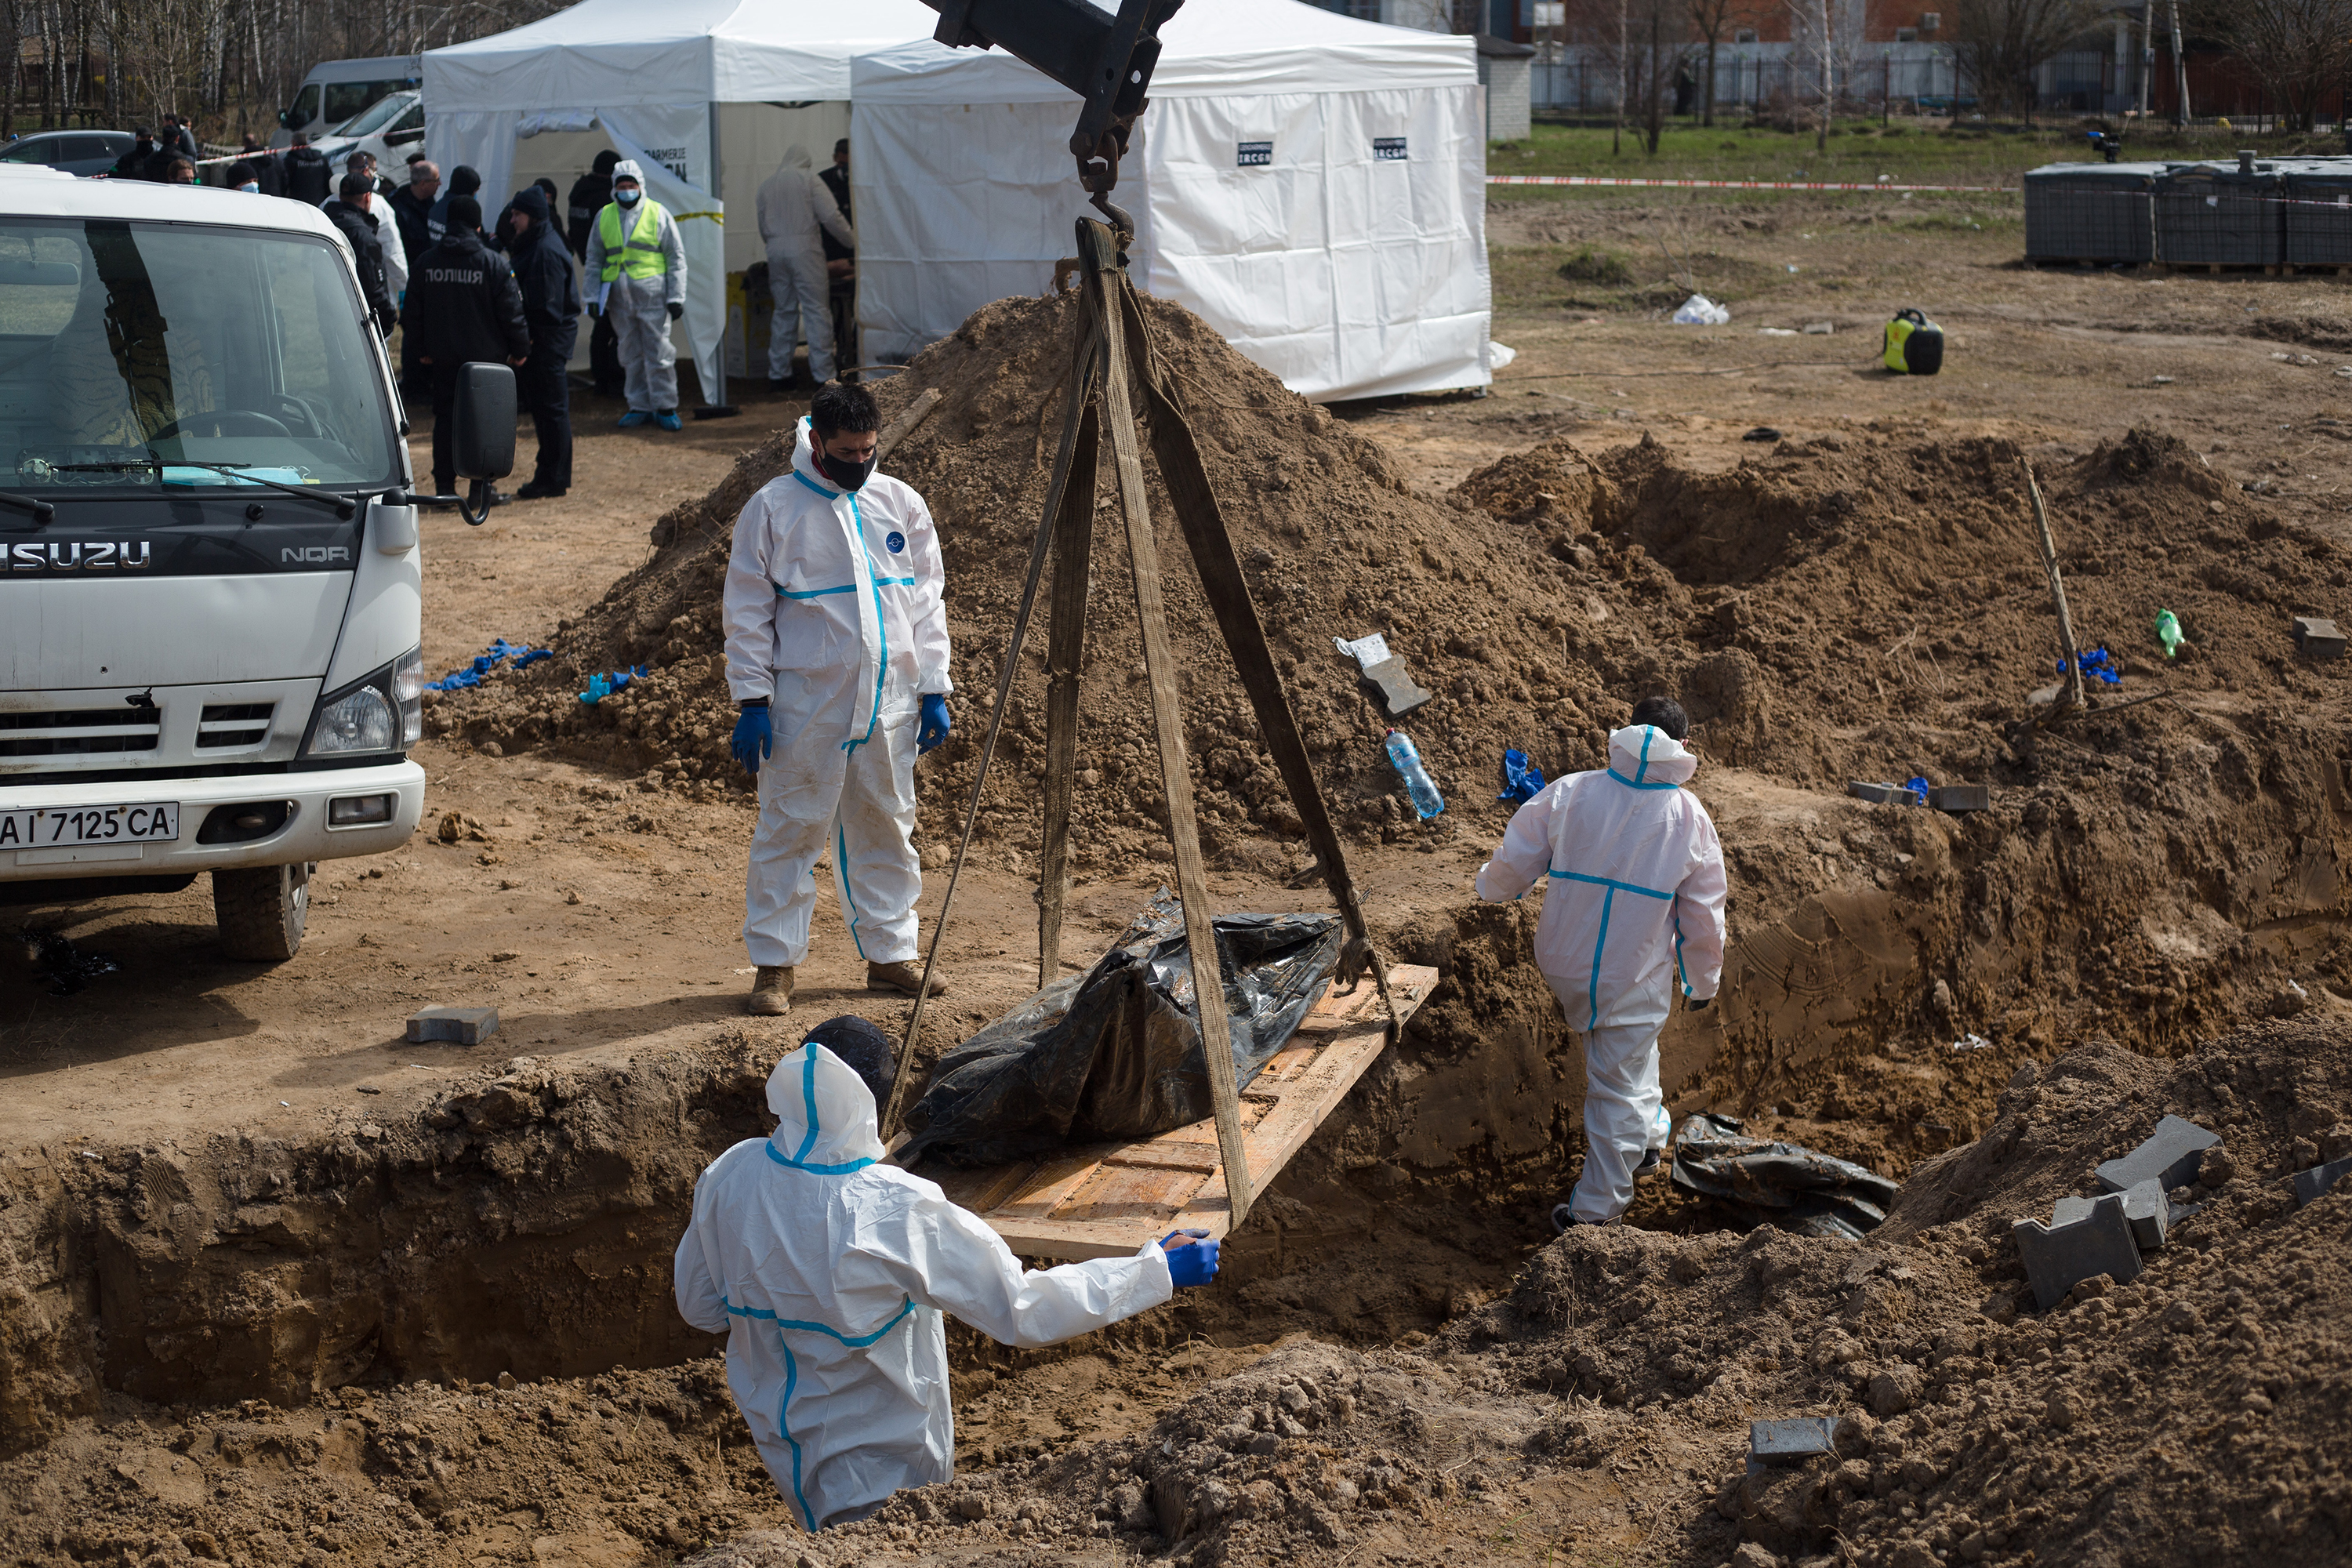 Workers remove bodies from a mass grave in Bucha, Ukraine on April 14.